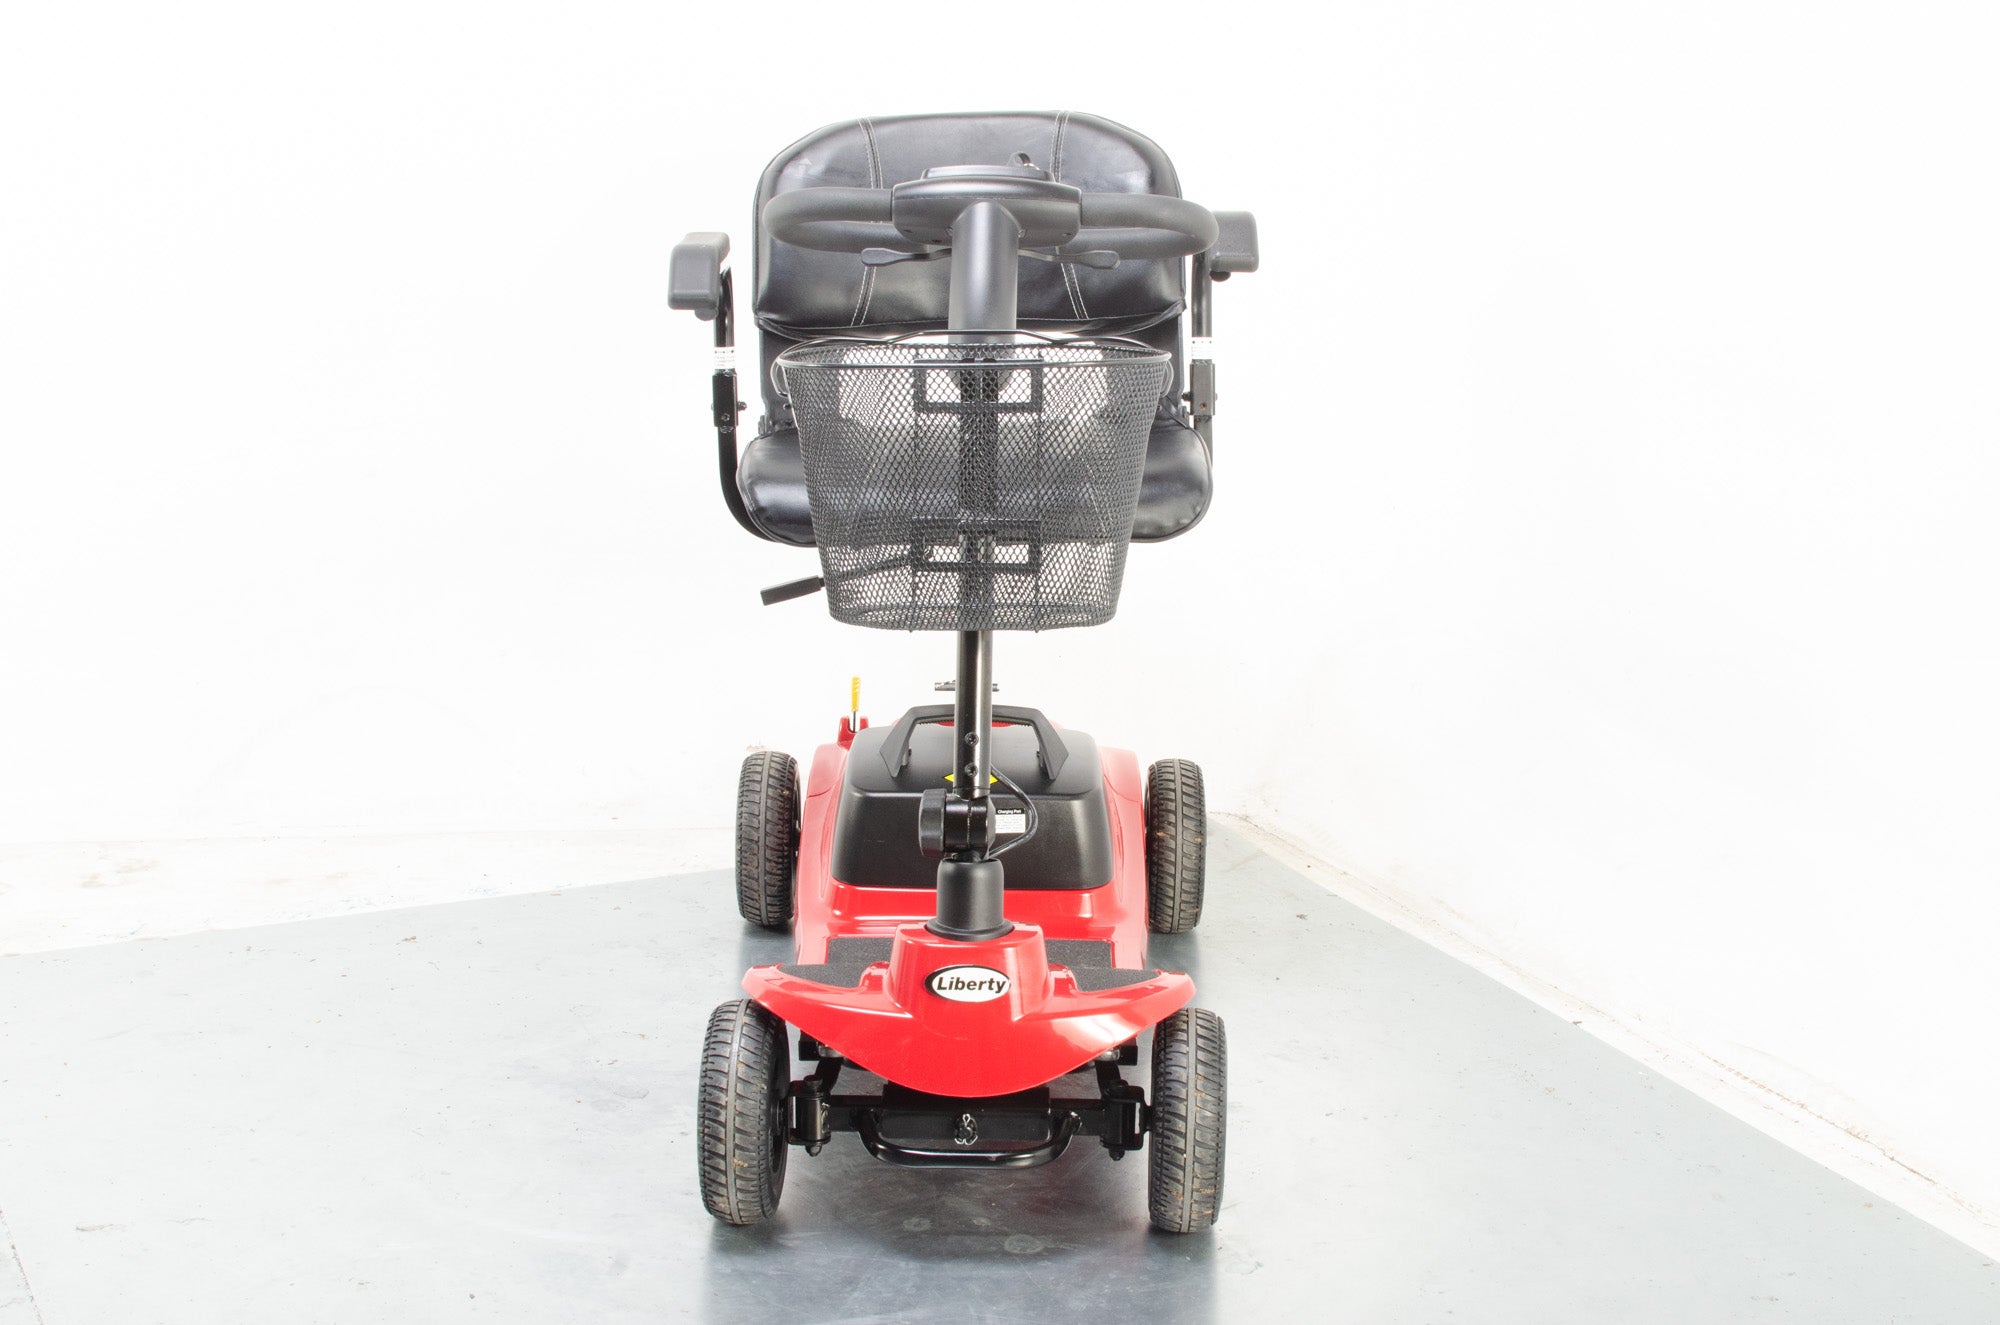 2018 KR Liberty from One-Rehab 4mph Small Electric Mobility Boot Scooter in Red